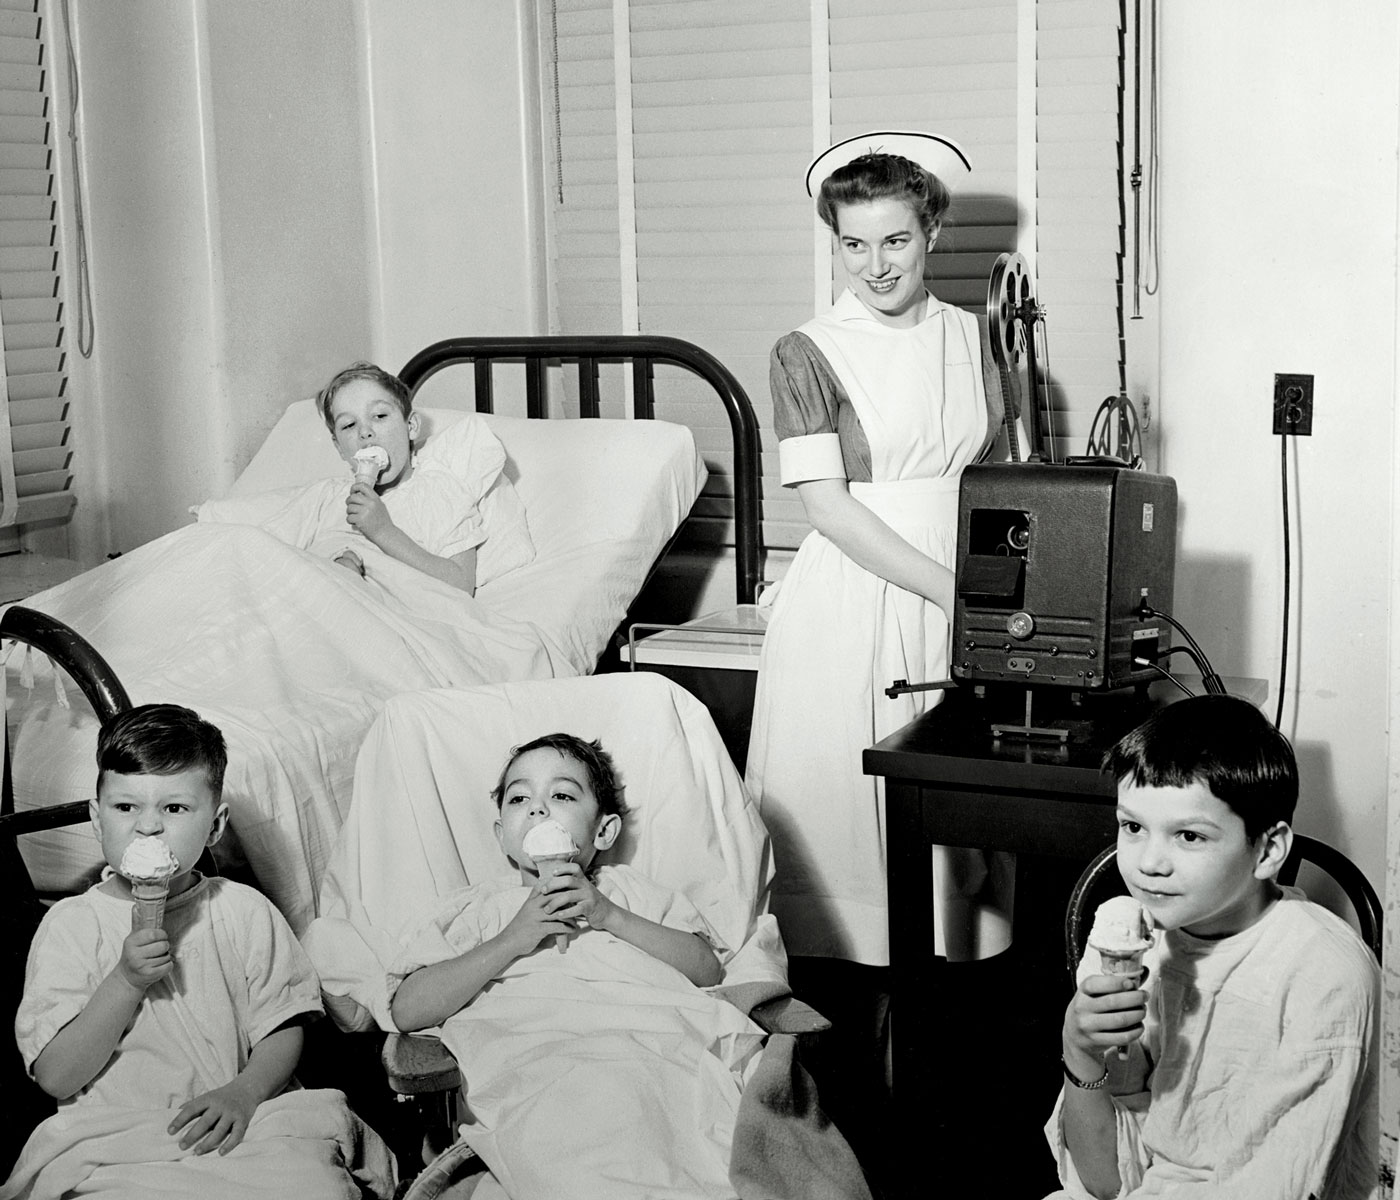 Kids in hospital gowns eat ice cream while nurse shows a movie on a projector, circa 1940